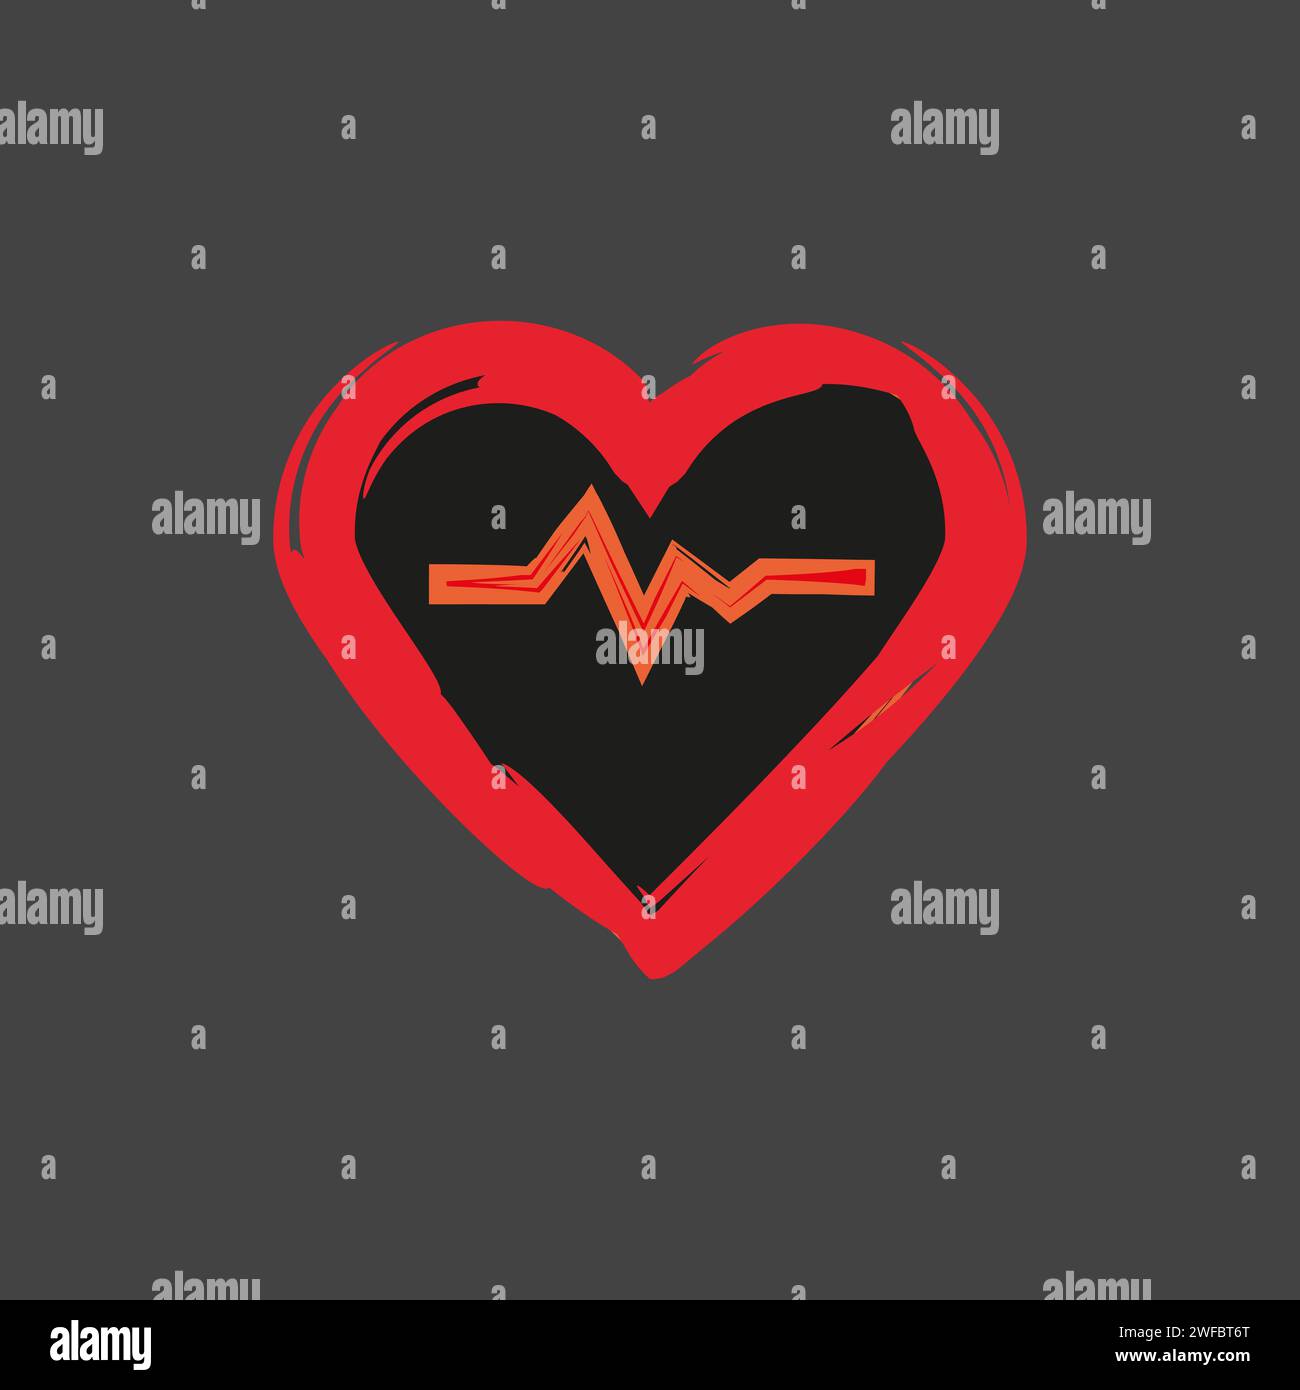 Pulse icon on black heart. Red brush frame. Healthcare concept. Medicine background. Vector illustration. Stock image. EPS 10. Stock Vector